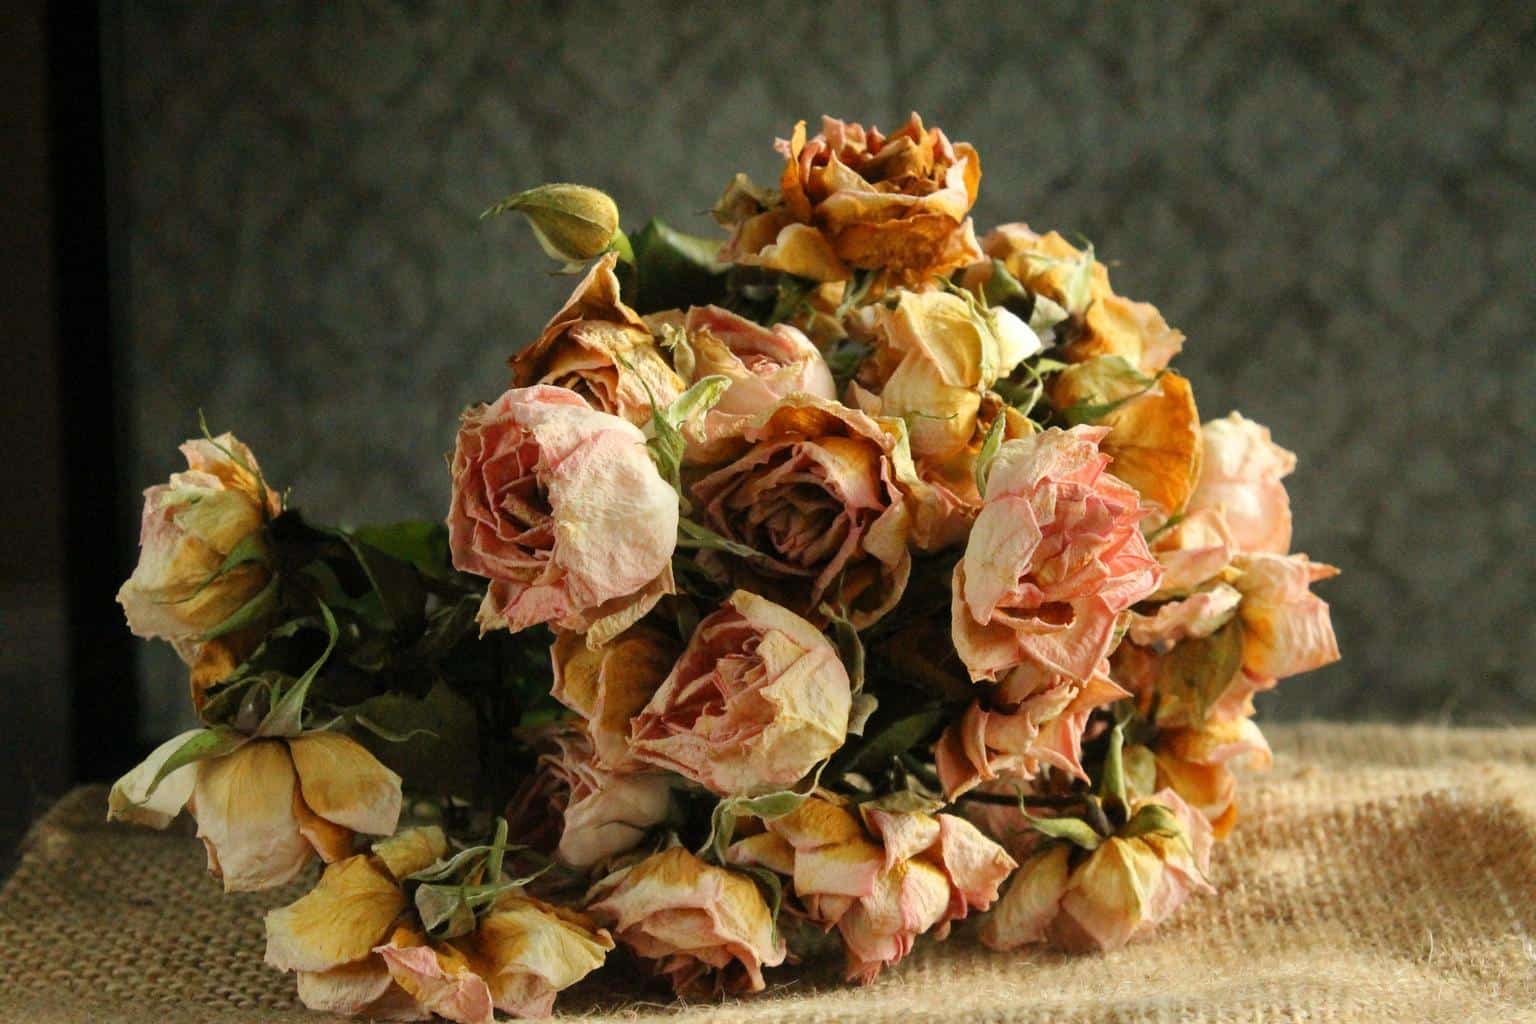 How to preserve flowers